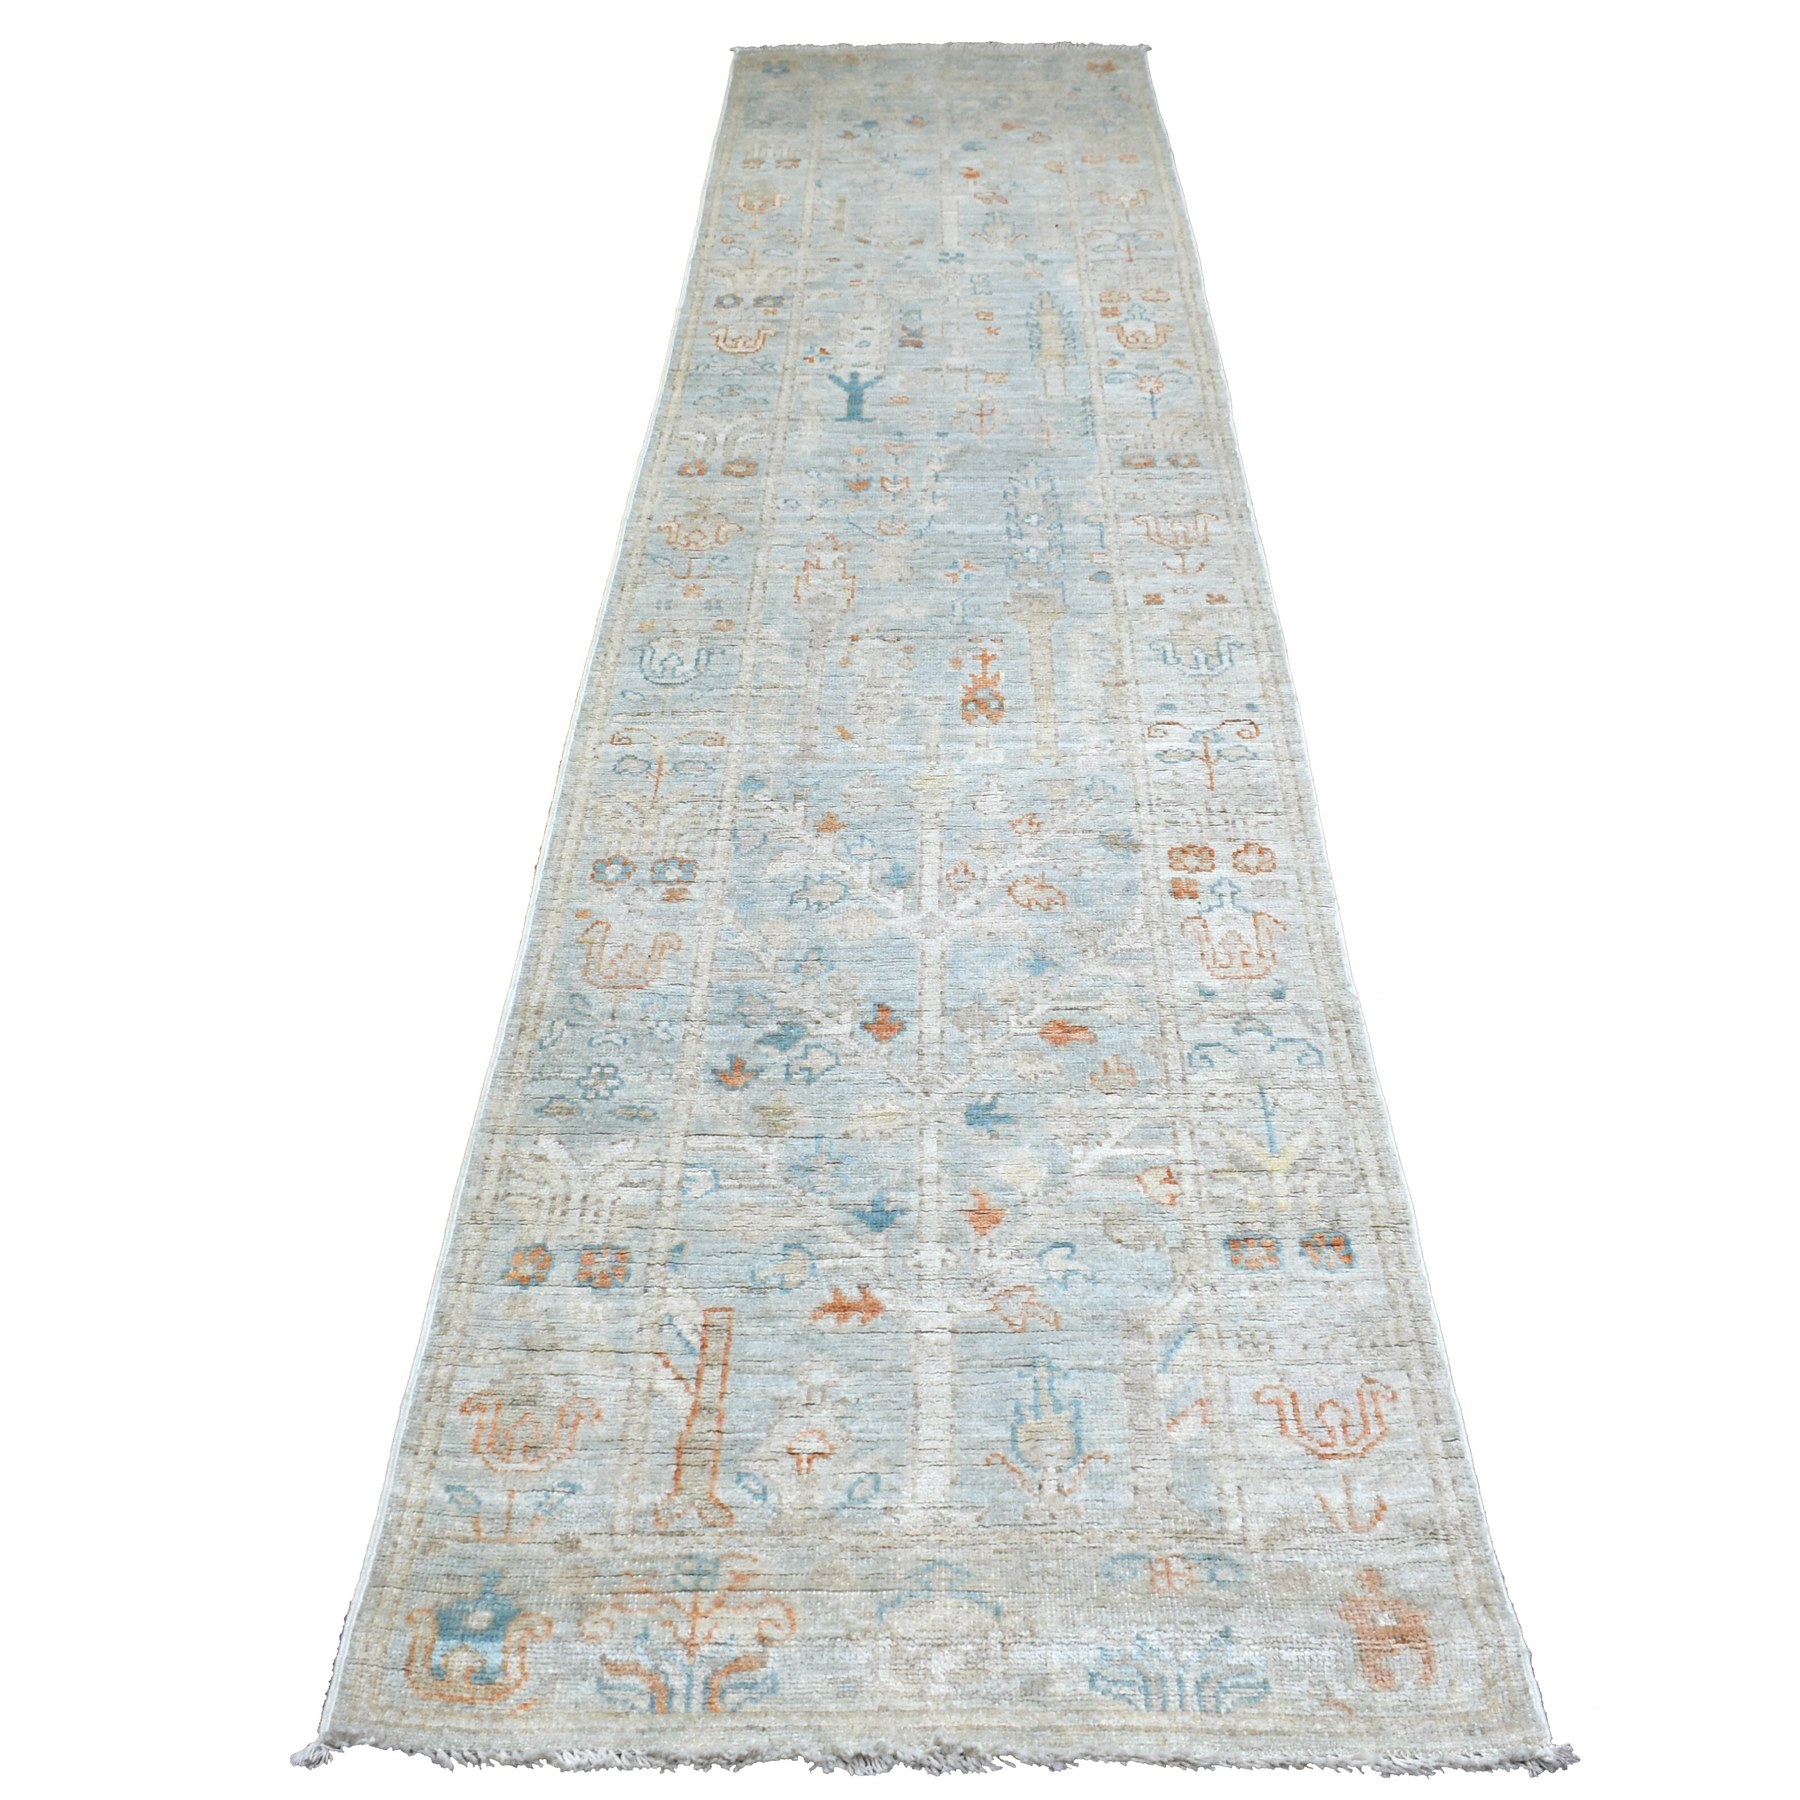 2'8"x11'7" Faded Blue Afghan Angora Ushak with Colorful Cypress and Willow Tree Design Hand Woven Pure Wool Runner Oriental Rug 